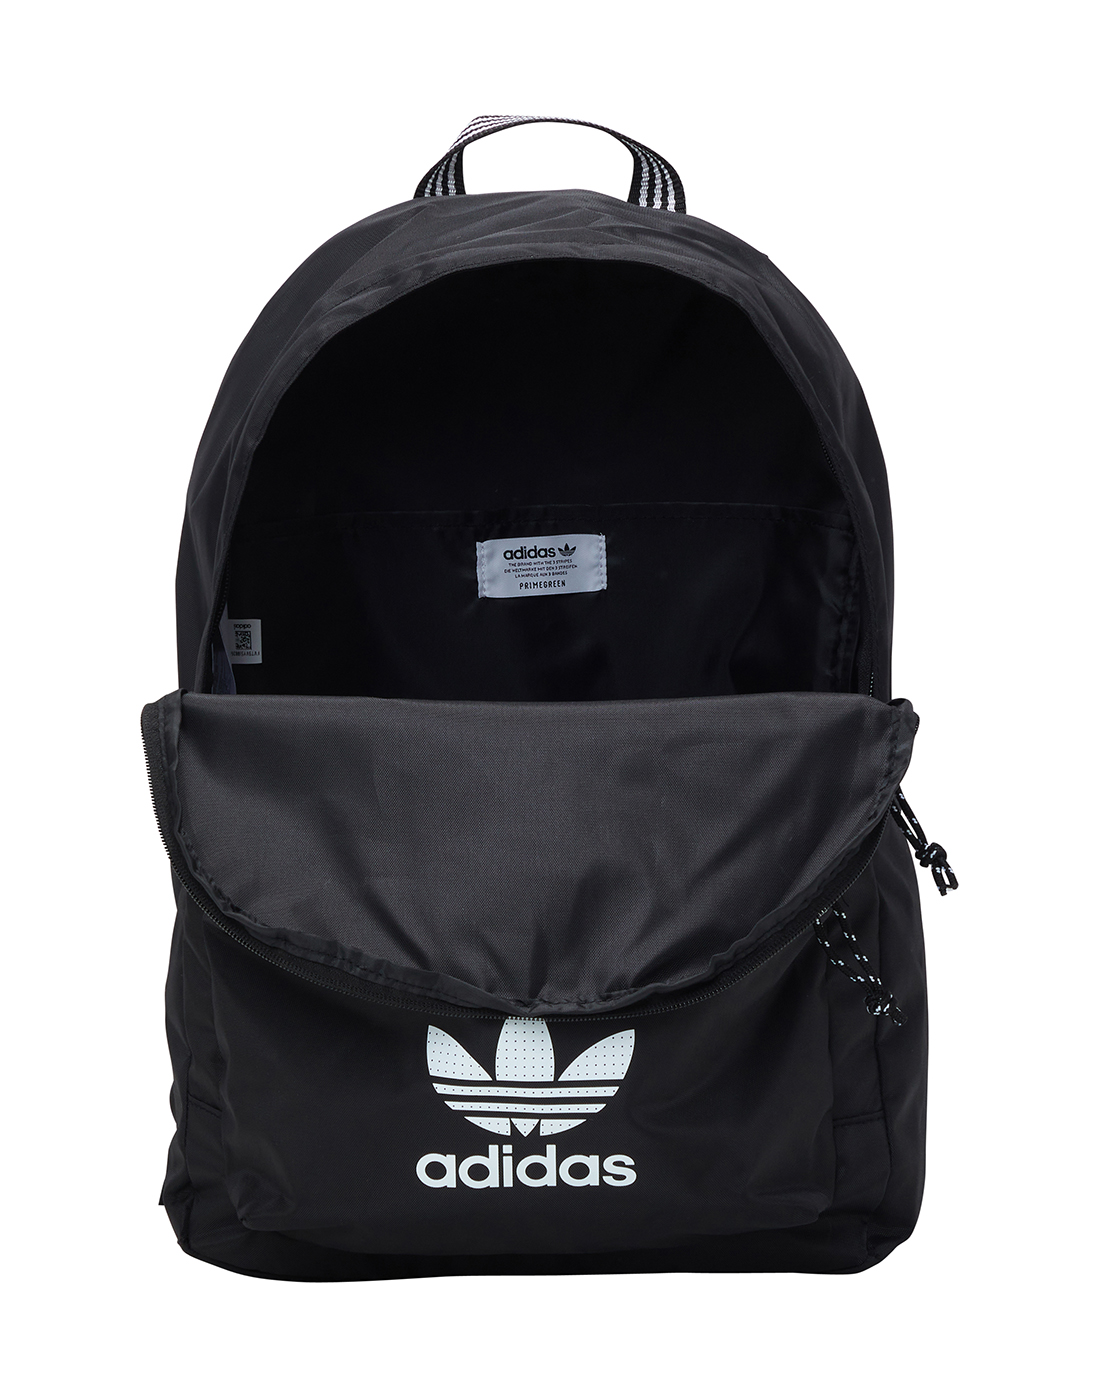 adidas Youth Classic 3S Backpack, Black/White Test, One Size, Classic 3s  Backpack : Amazon.sg: Fashion